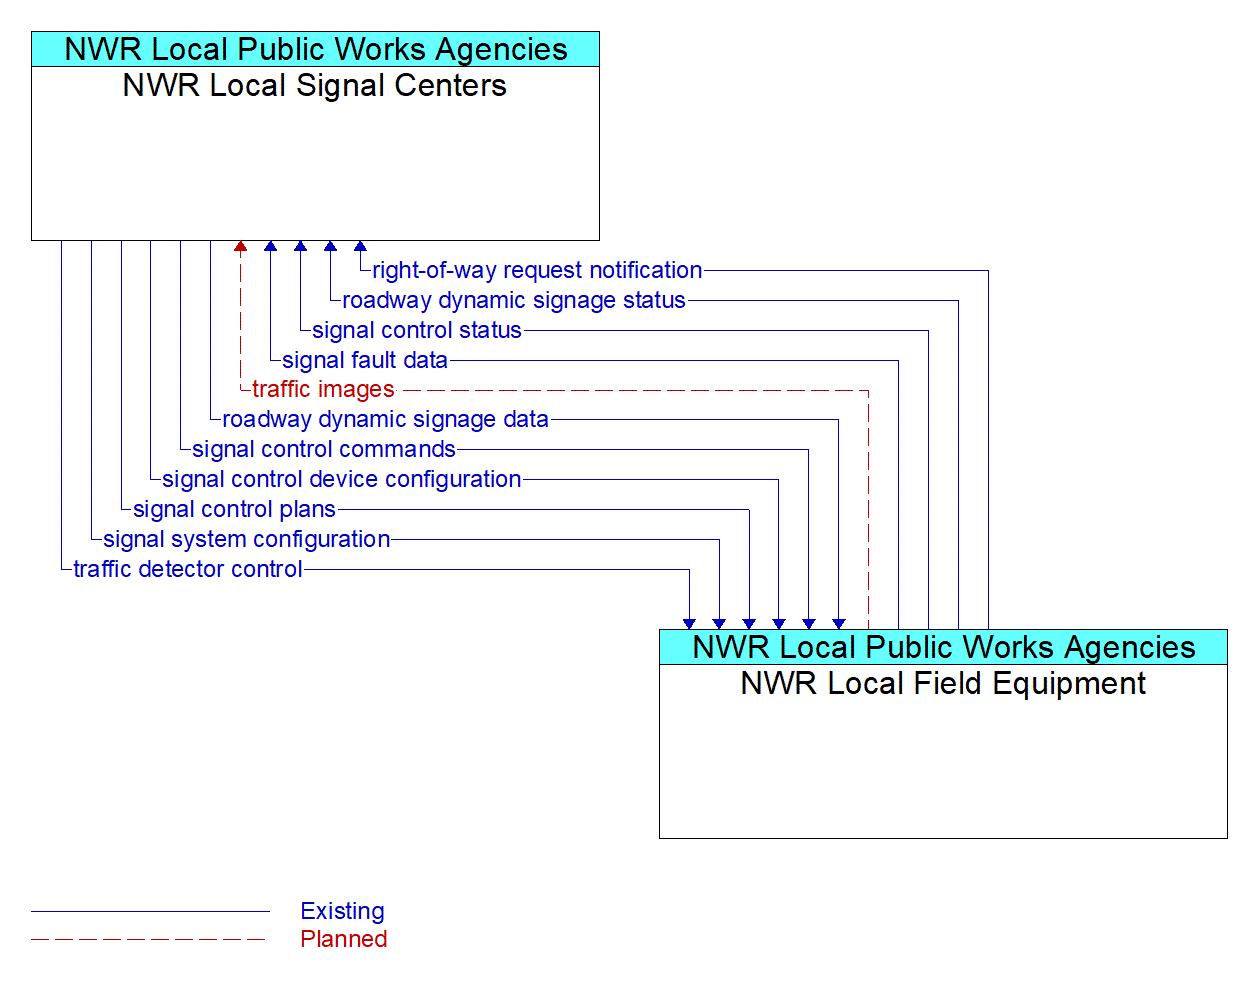 Architecture Flow Diagram: NWR Local Field Equipment <--> NWR Local Signal Centers